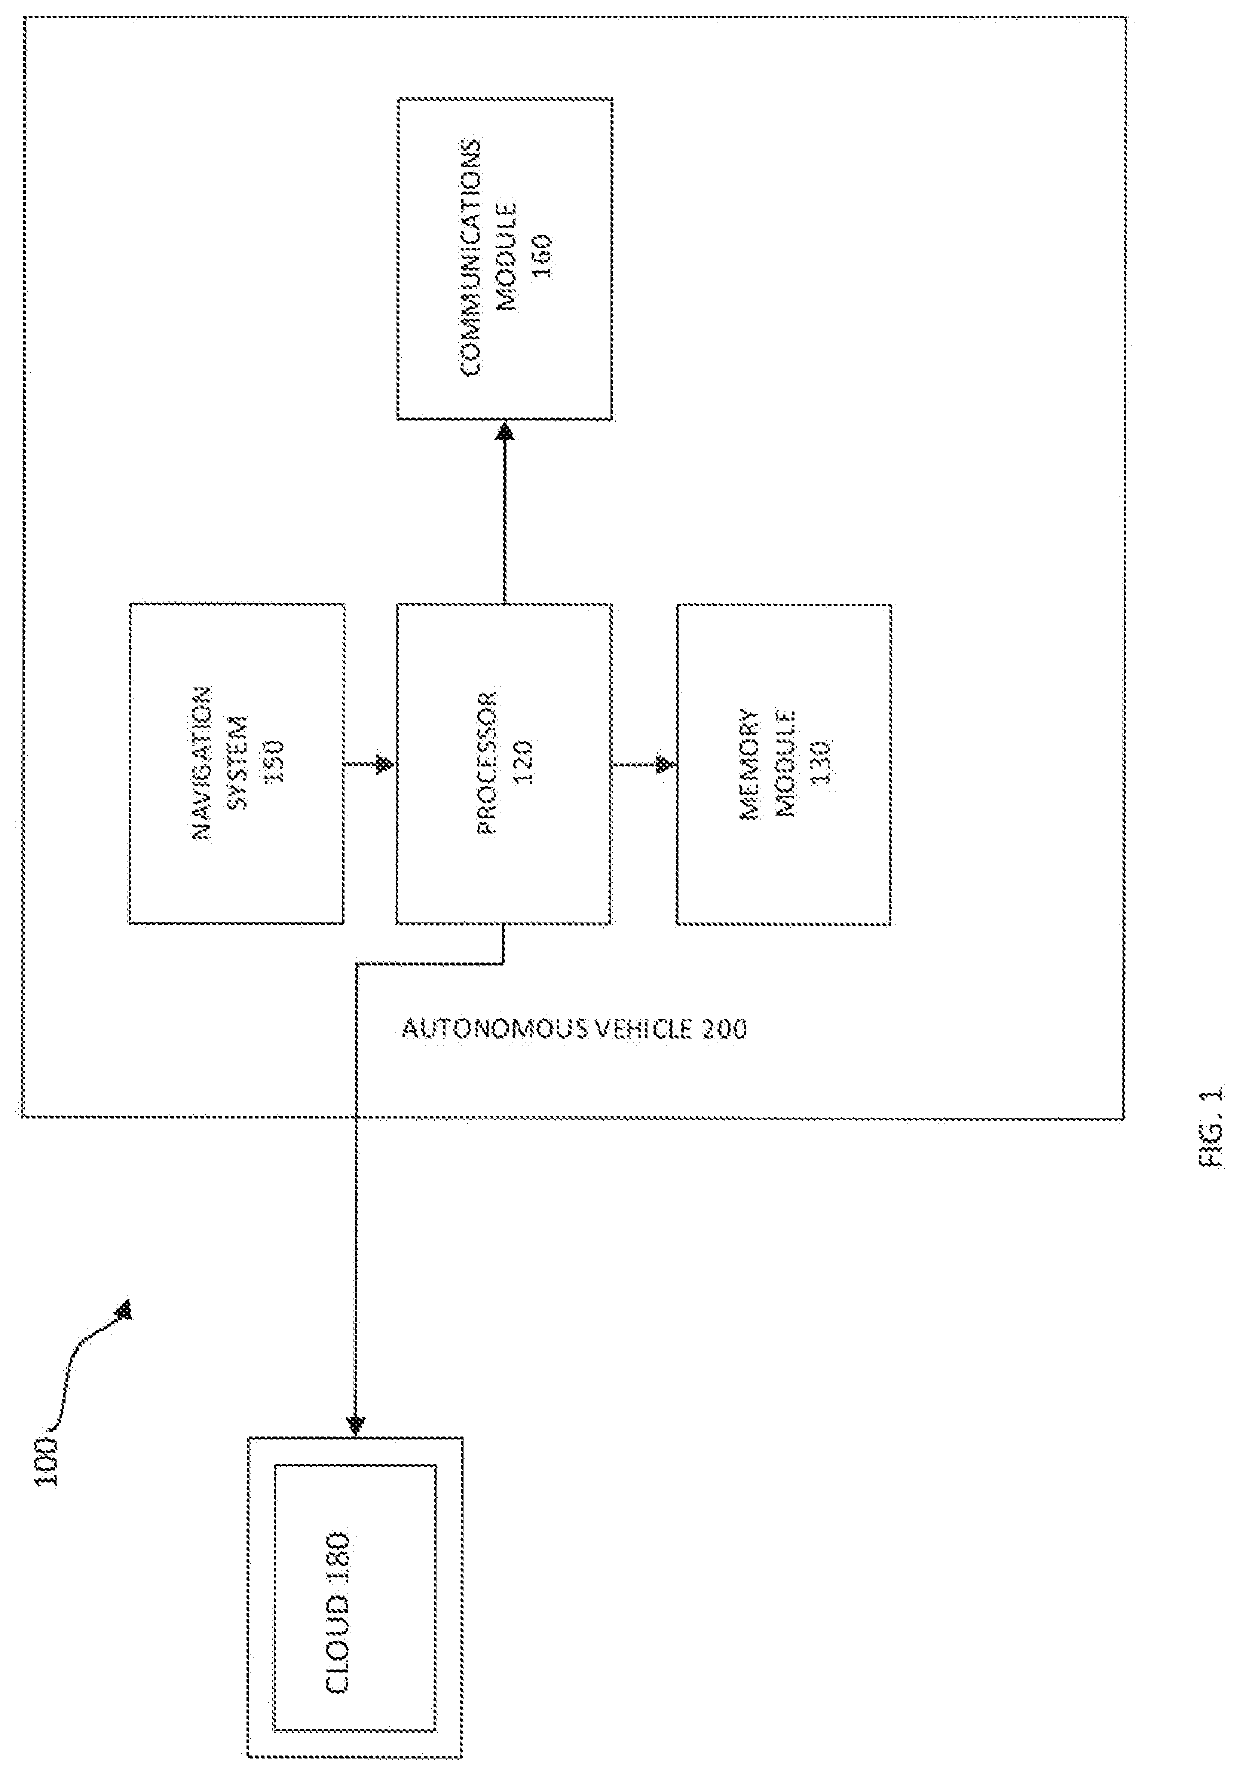 System for conducting maintenance for autonomous vehicles and related methods